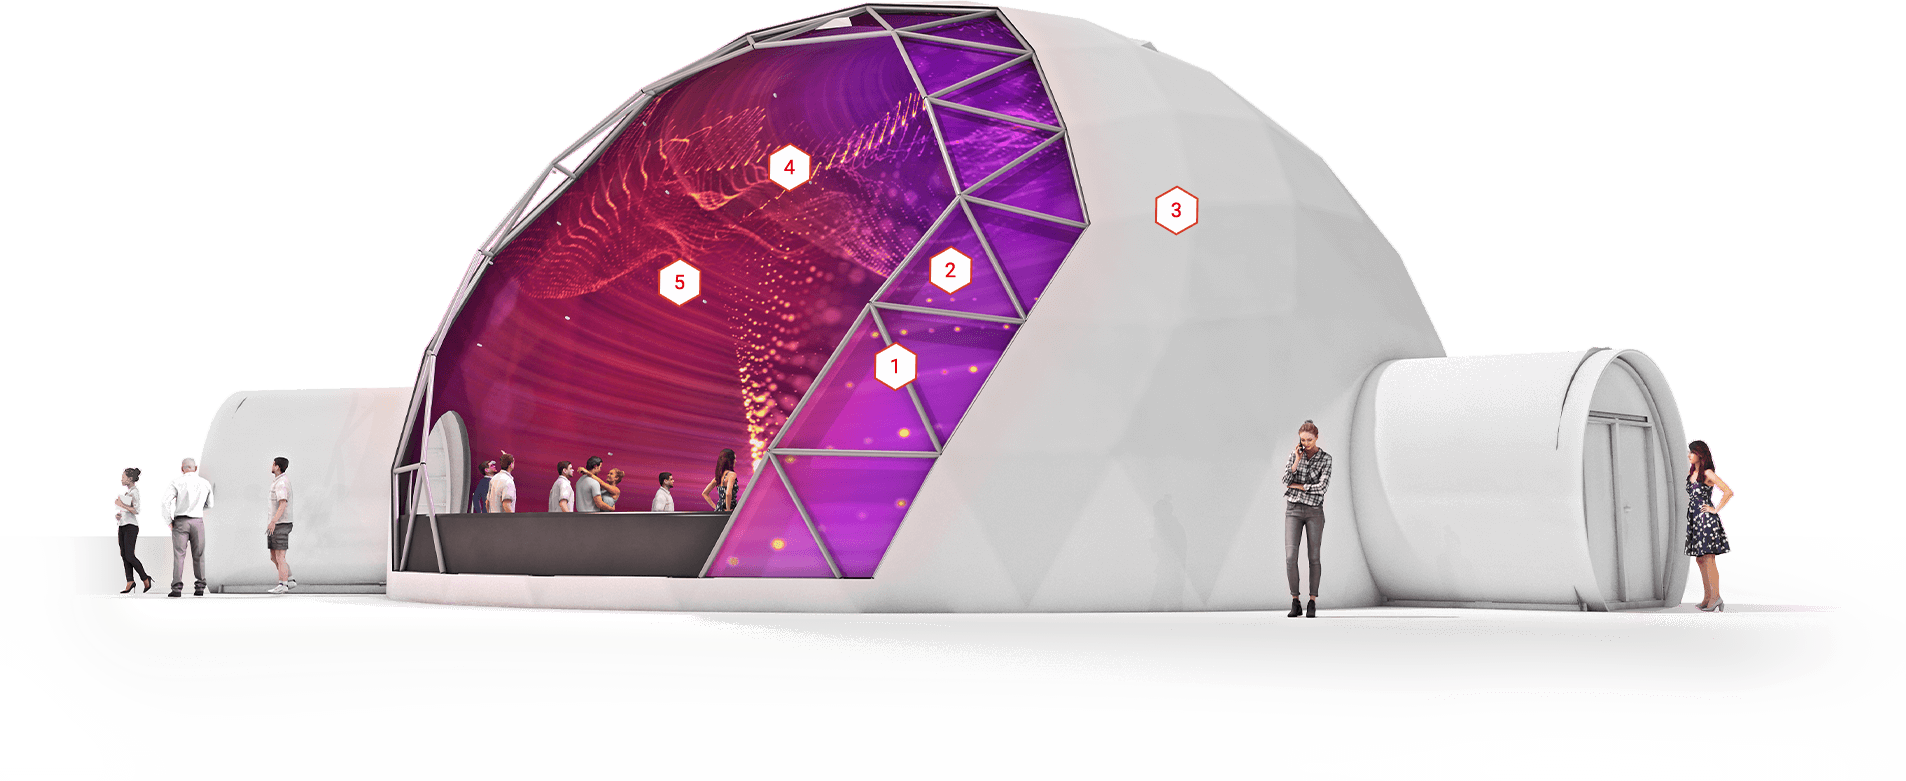 Fulldome 360 projection